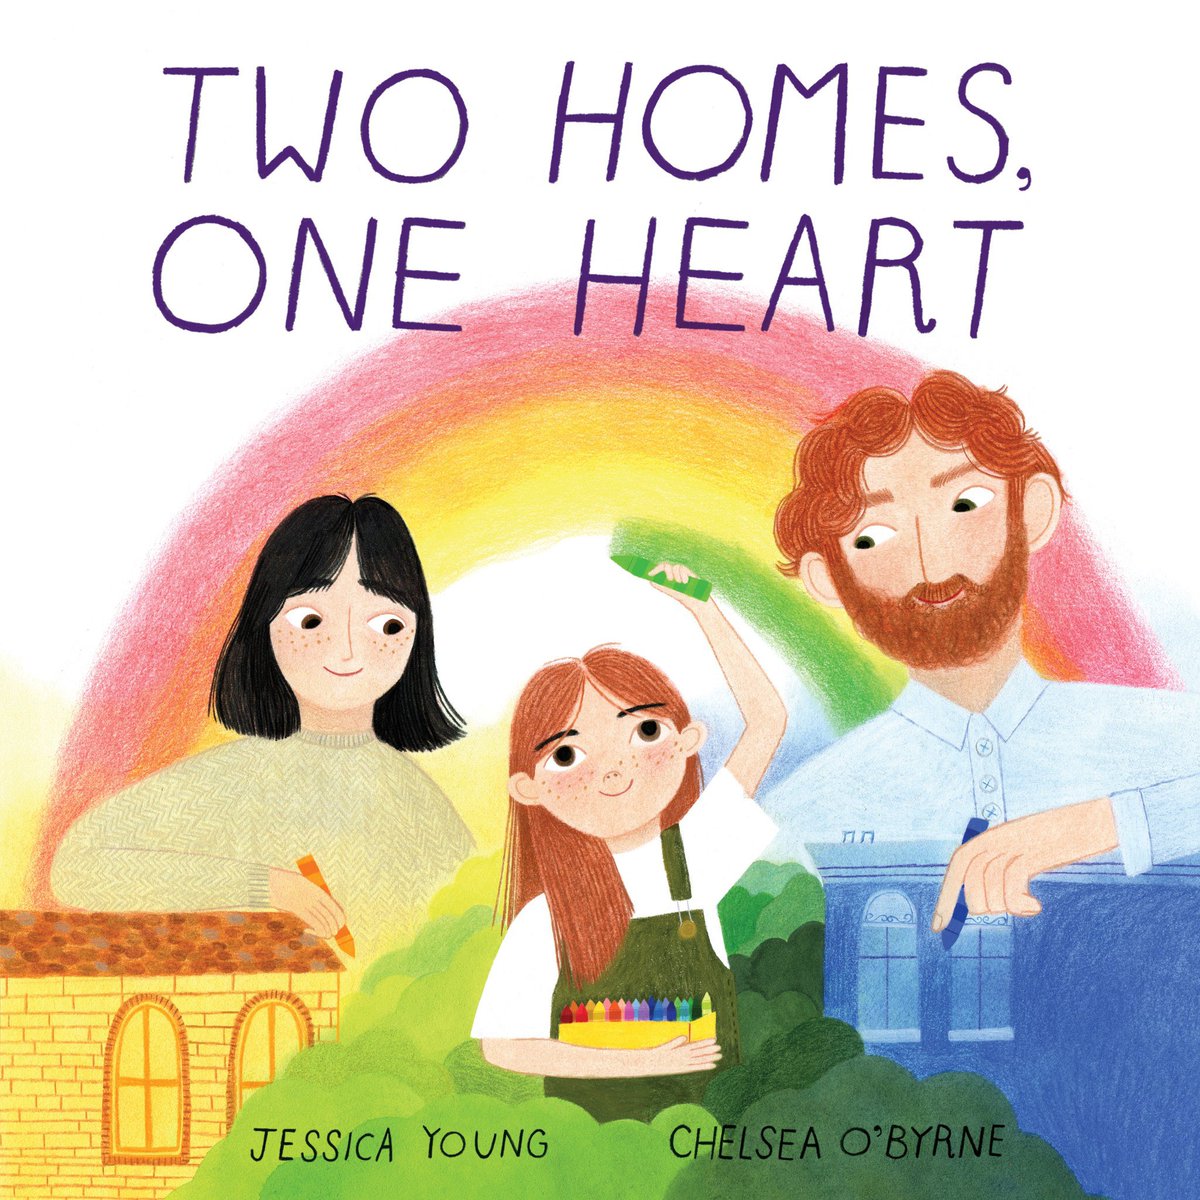 Check out my @PicBkBuilders interview with @happybluejess about TWO HOMES, ONE HEART. This book will resonate with so many as it is about changing families…and enduring love. #ChelseaO’Byrne picturebookbuilders.com/2024/03/two-ho… ➡️➡️RT for a chance to win a copy!